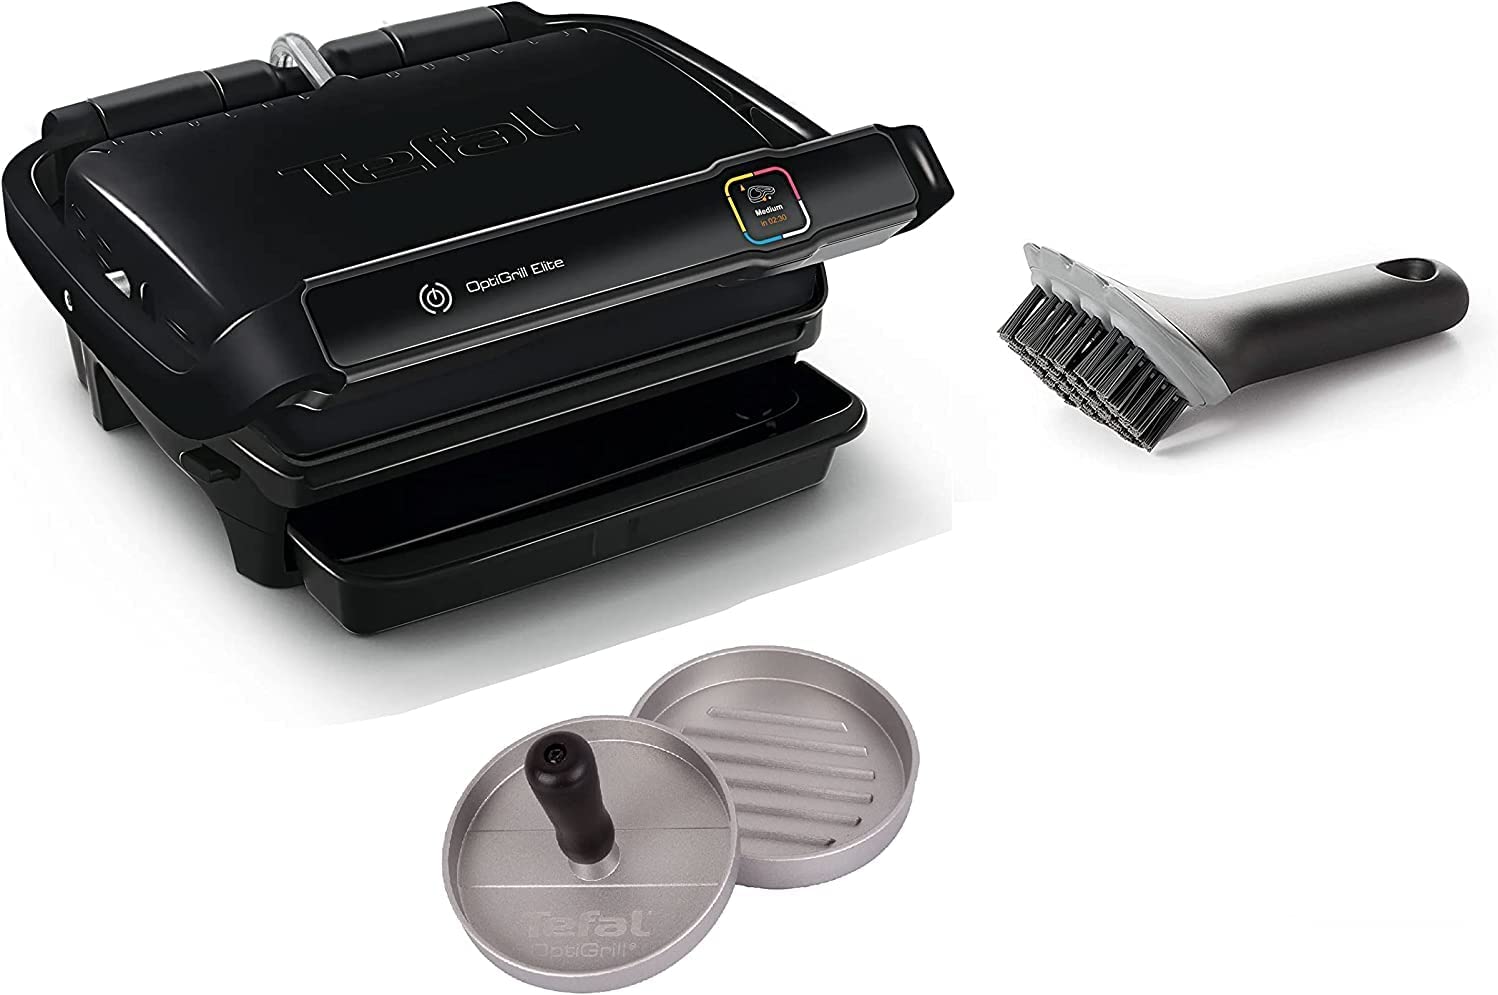 Tefal Optigrill Elite Contact Grill I 2000 Watt I with Hamburger Press + Grill Brush I Indoor & Outdoor Grill I 12 Automatic Programmes I Touch Display I Stainless Steel I Perfect Grilling Results